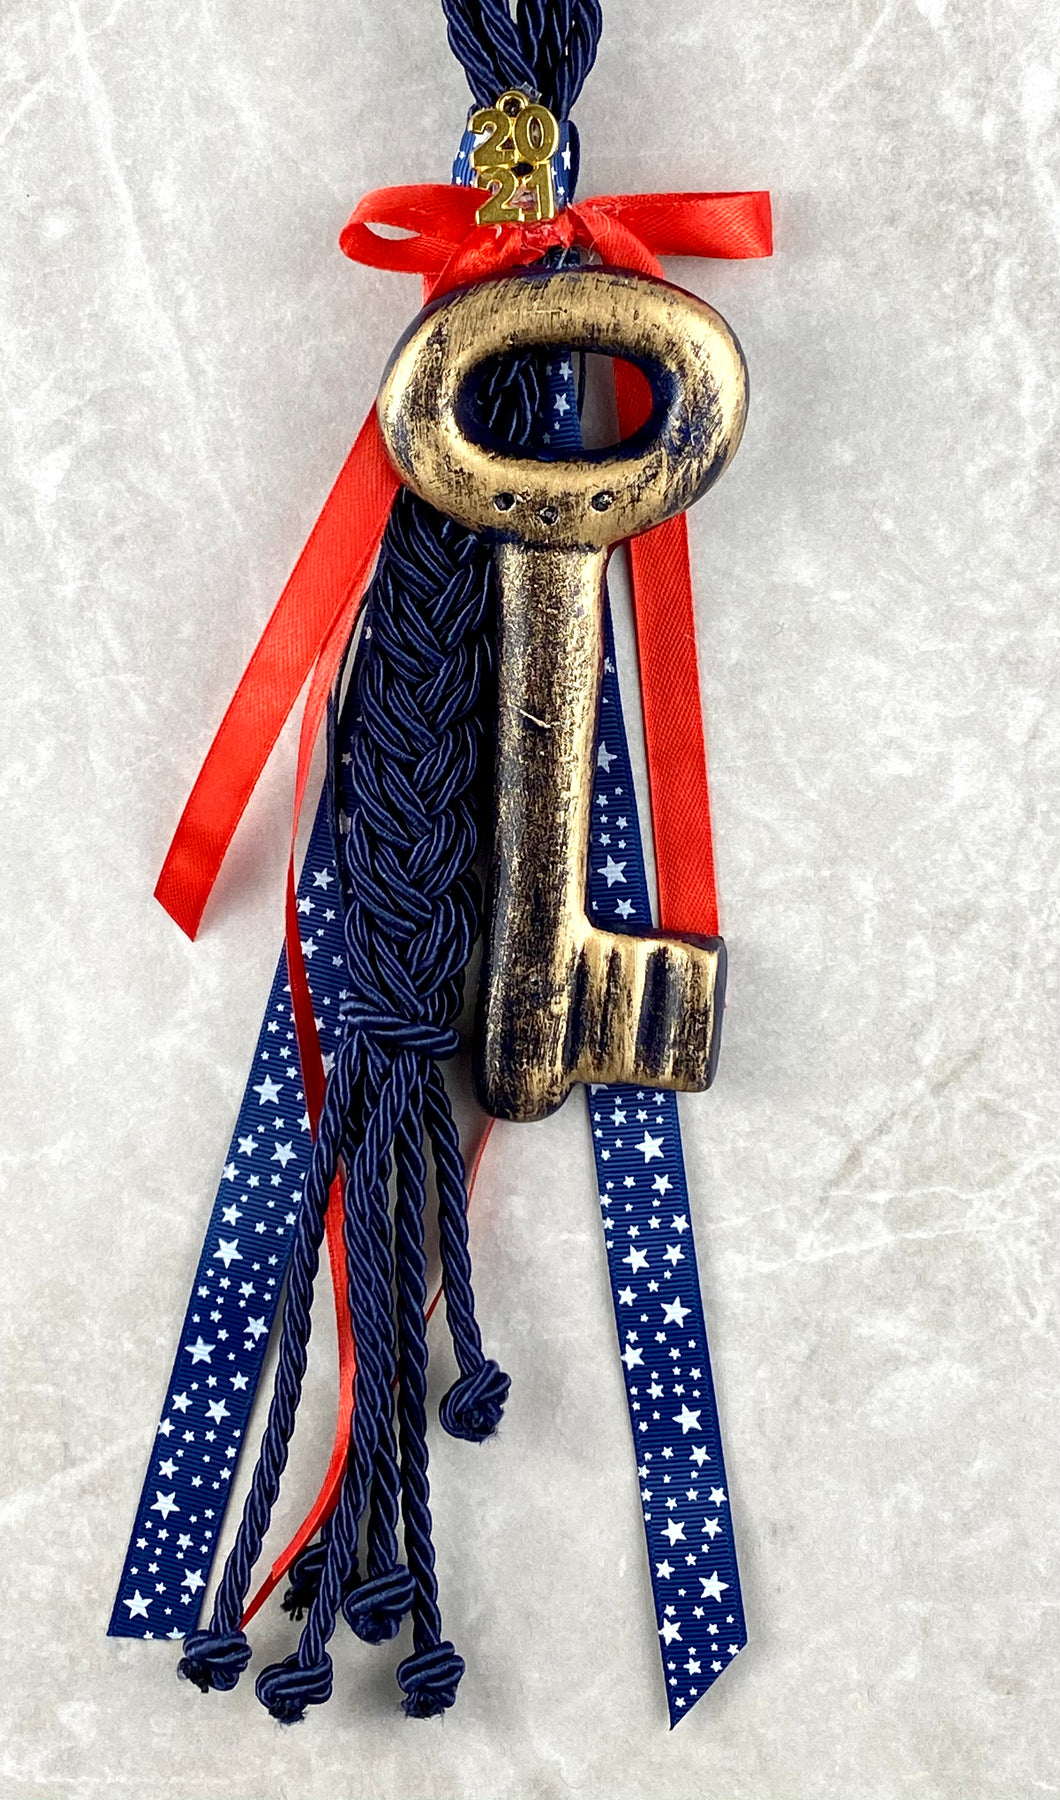 Large Ceramic Key Gouri on Navy Blue Braided Cord with Ribbons and 2021 Charm